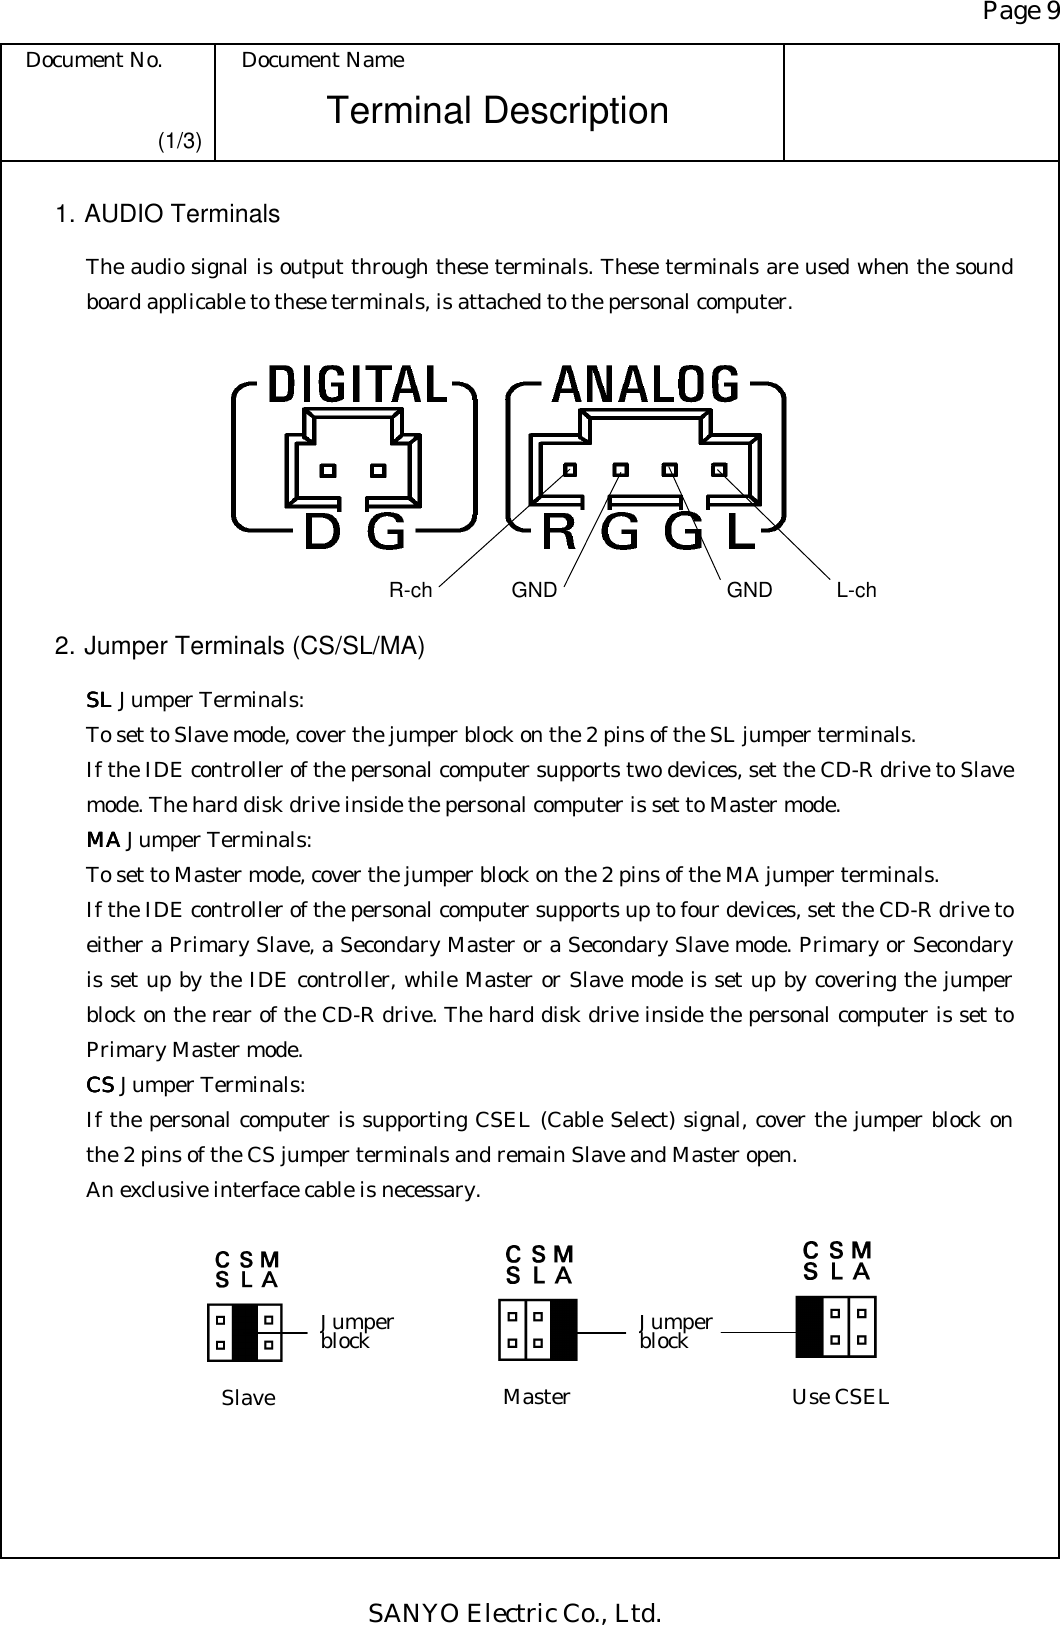 Page 9 Document No.  Document Name SANYO Electric Co., Ltd. Terminal Description (1/3) 1. AUDIO Terminals The audio signal is output through these terminals. These terminals are used when the sound board applicable to these terminals, is attached to the personal computer.           2. Jumper Terminals (CS/SL/MA) SLSLSLSL Jumper Terminals: To set to Slave mode, cover the jumper block on the 2 pins of the SL jumper terminals. If the IDE controller of the personal computer supports two devices, set the CD-R drive to Slave mode. The hard disk drive inside the personal computer is set to Master mode. MAMAMAMA Jumper Terminals: To set to Master mode, cover the jumper block on the 2 pins of the MA jumper terminals. If the IDE controller of the personal computer supports up to four devices, set the CD-R drive to either a Primary Slave, a Secondary Master or a Secondary Slave mode. Primary or Secondary is set up by the IDE controller, while Master or Slave mode is set up by covering the jumper block on the rear of the CD-R drive. The hard disk drive inside the personal computer is set to Primary Master mode. CSCSCSCS Jumper Terminals: If the personal computer is supporting CSEL (Cable Select) signal, cover the jumper block on the 2 pins of the CS jumper terminals and remain Slave and Master open. An exclusive interface cable is necessary.  R-ch  GND  L-ch GND  Slave   Master   Use CSEL Jumper block Jumper block 